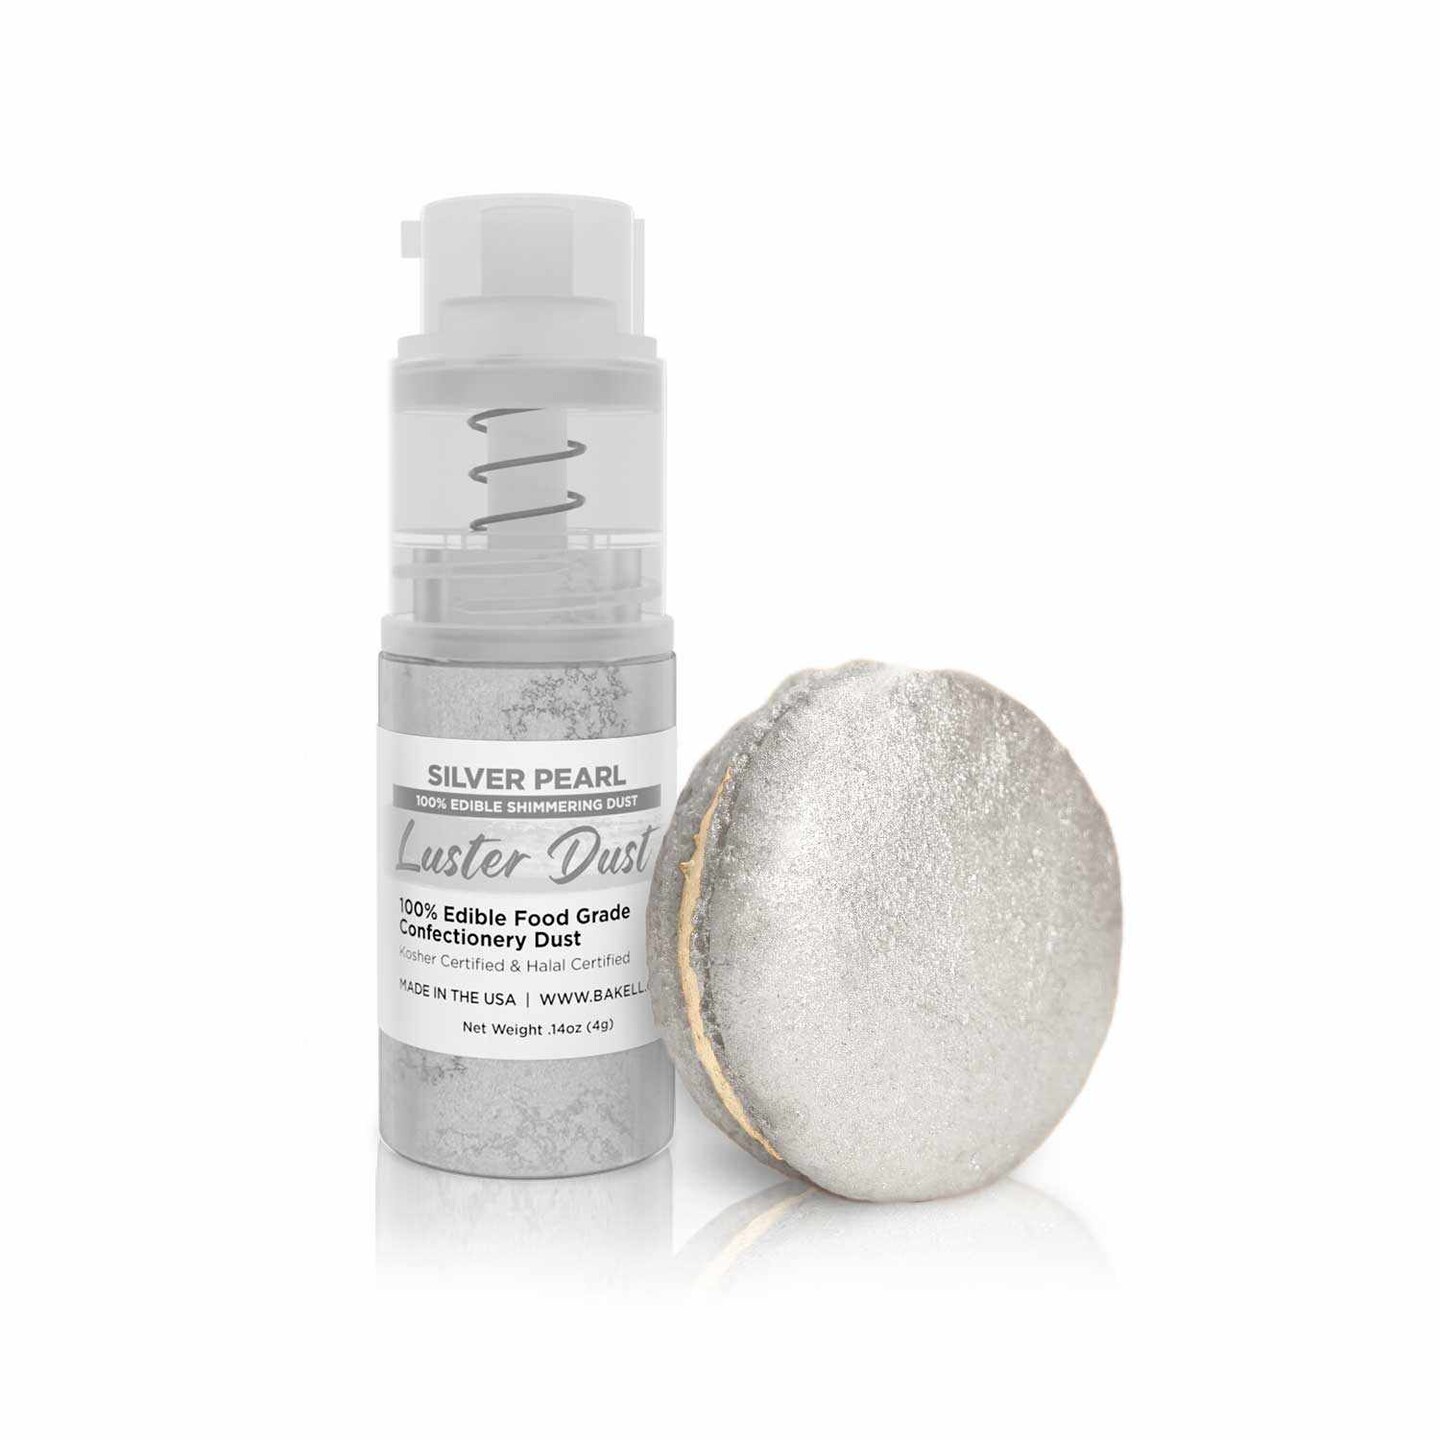 Silver Luster Dust Spray | Luster Dust Edible Glitter Spray Dust for Cakes, Cookies, Desserts, Paint. FDA Compliant (4 Gram Pump)